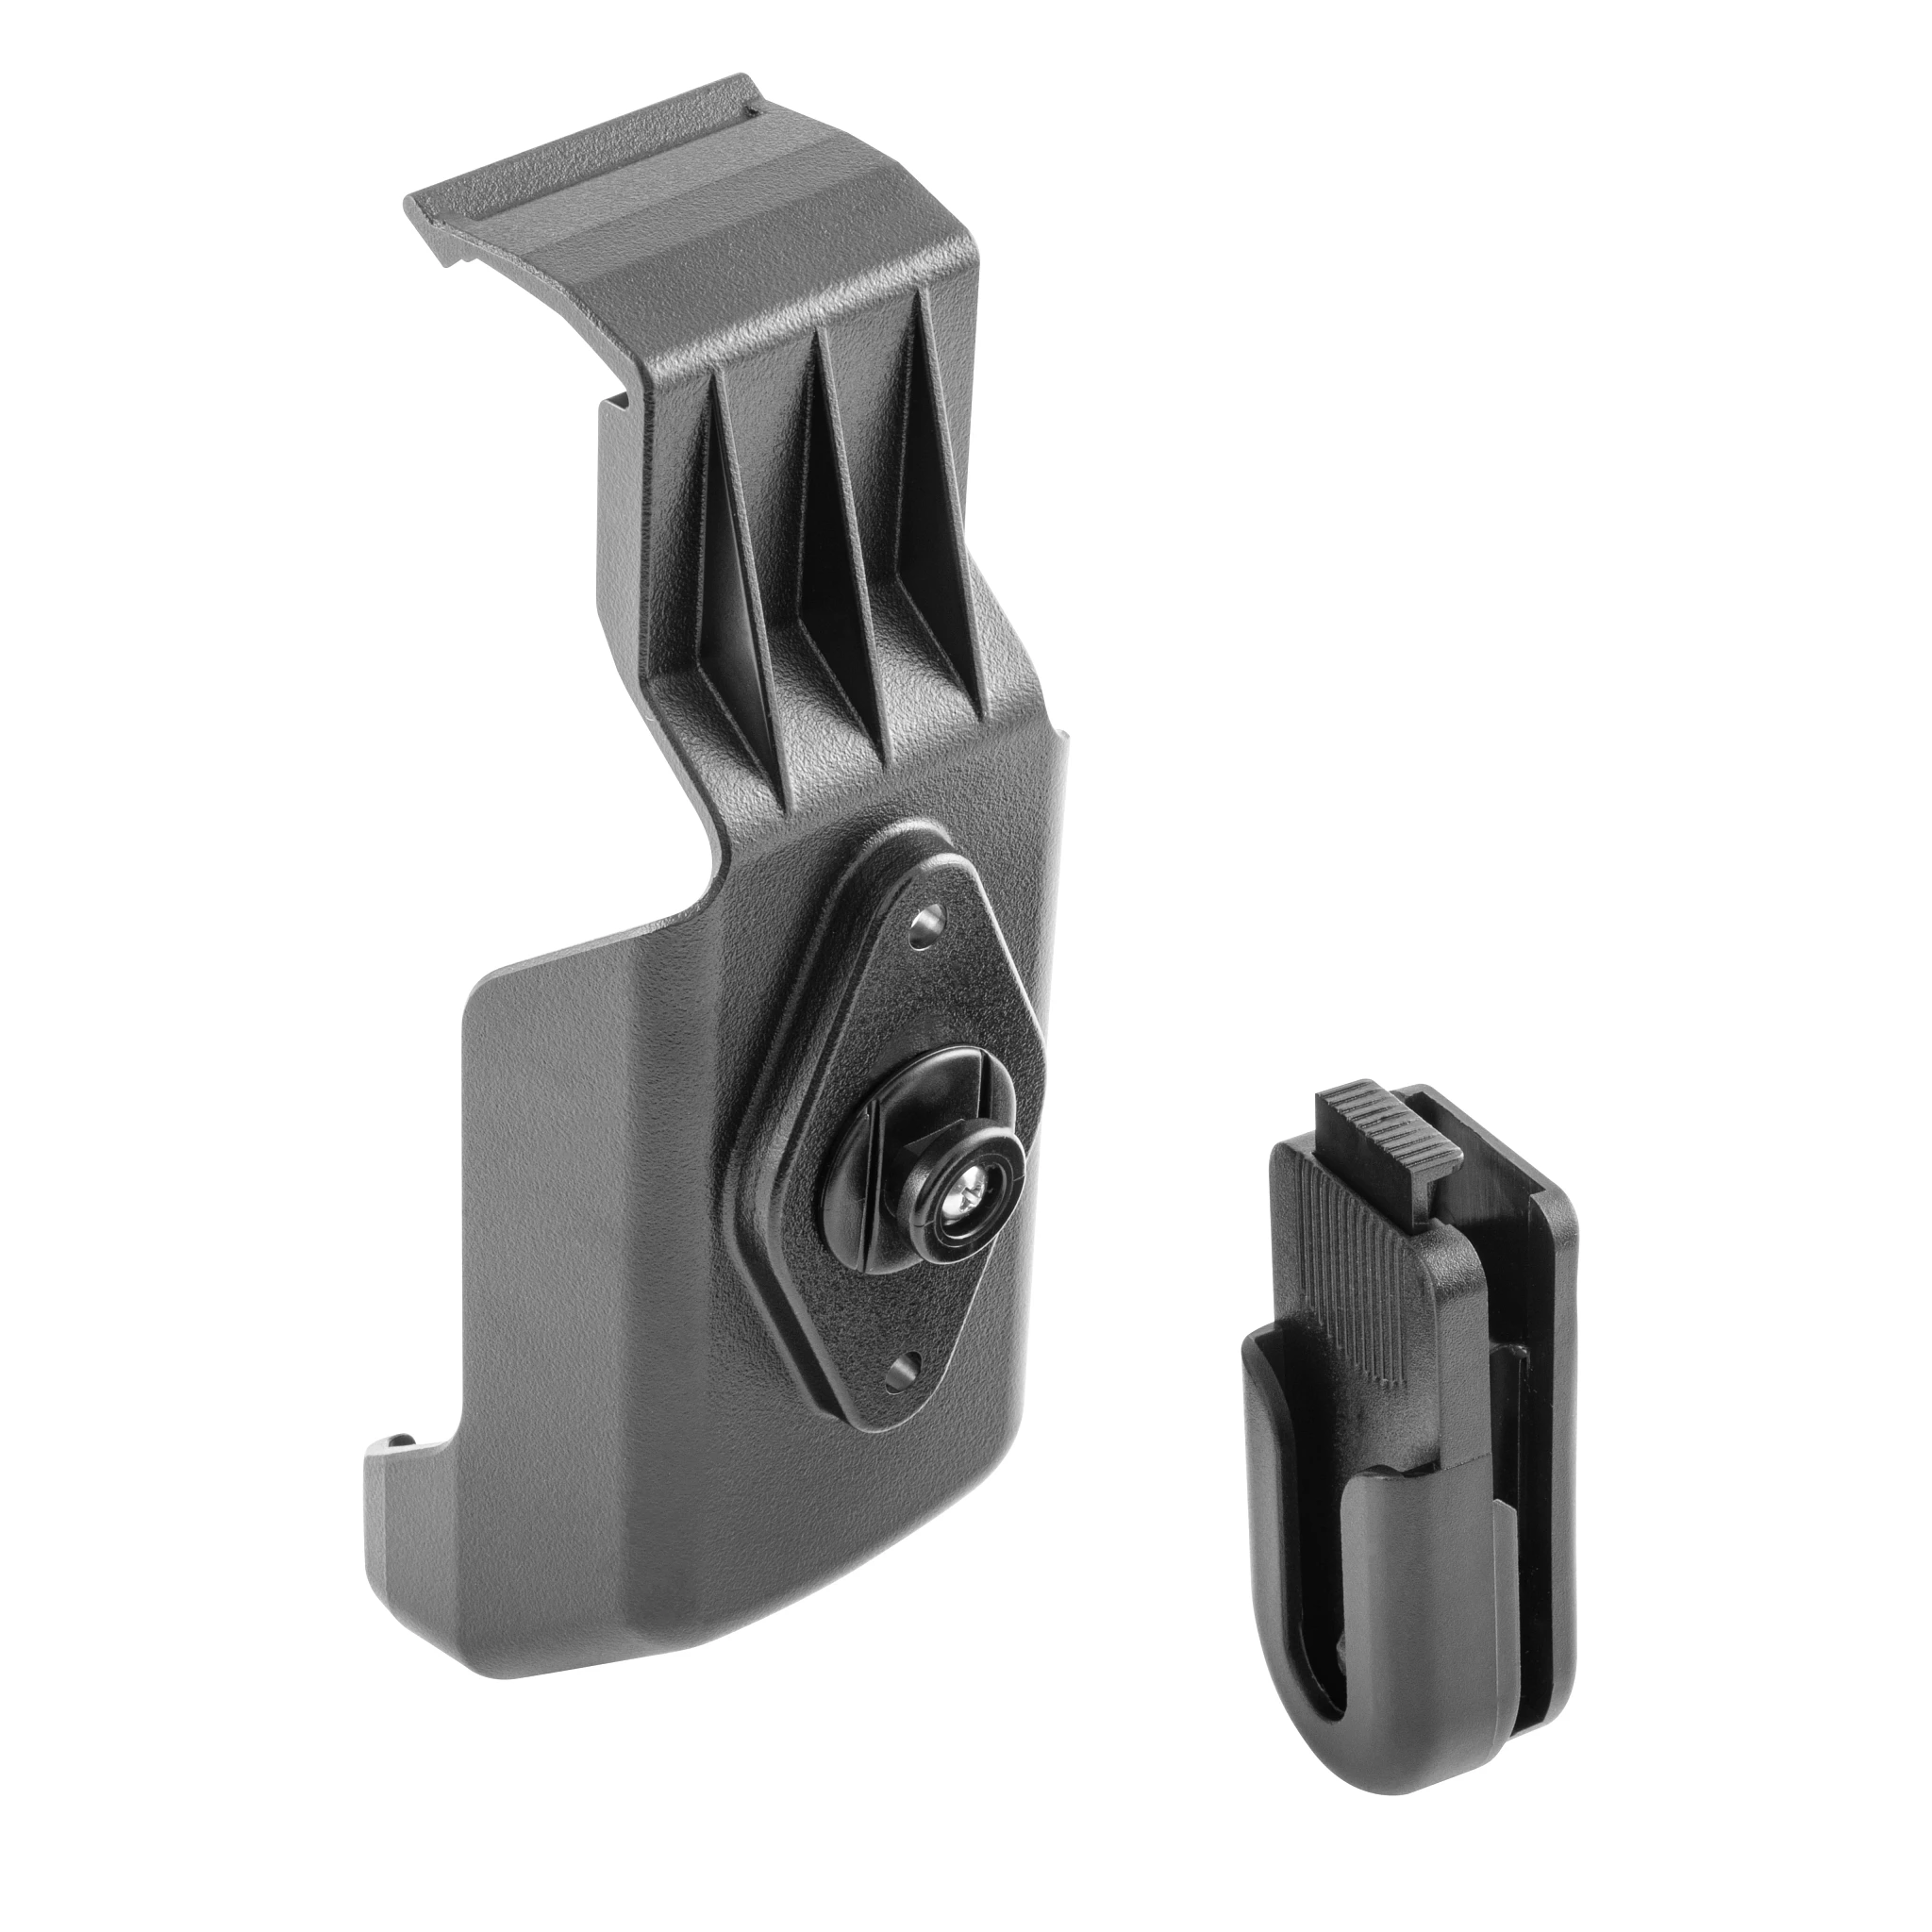 Advanced GPS Navigation Wireless Remote Cradle shown with clip component